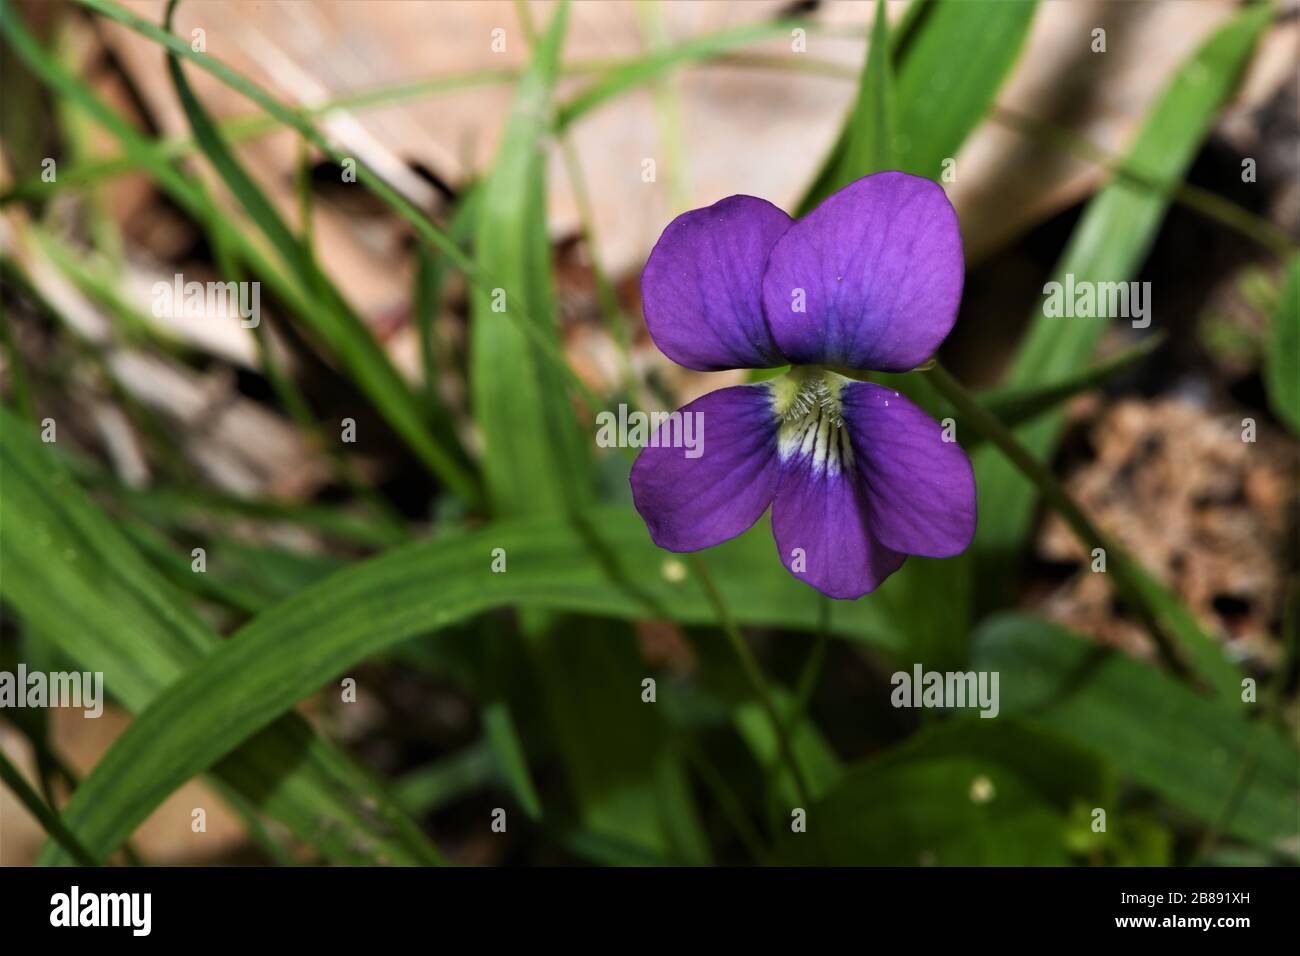 Common violets are blue my dear. Stock Photo